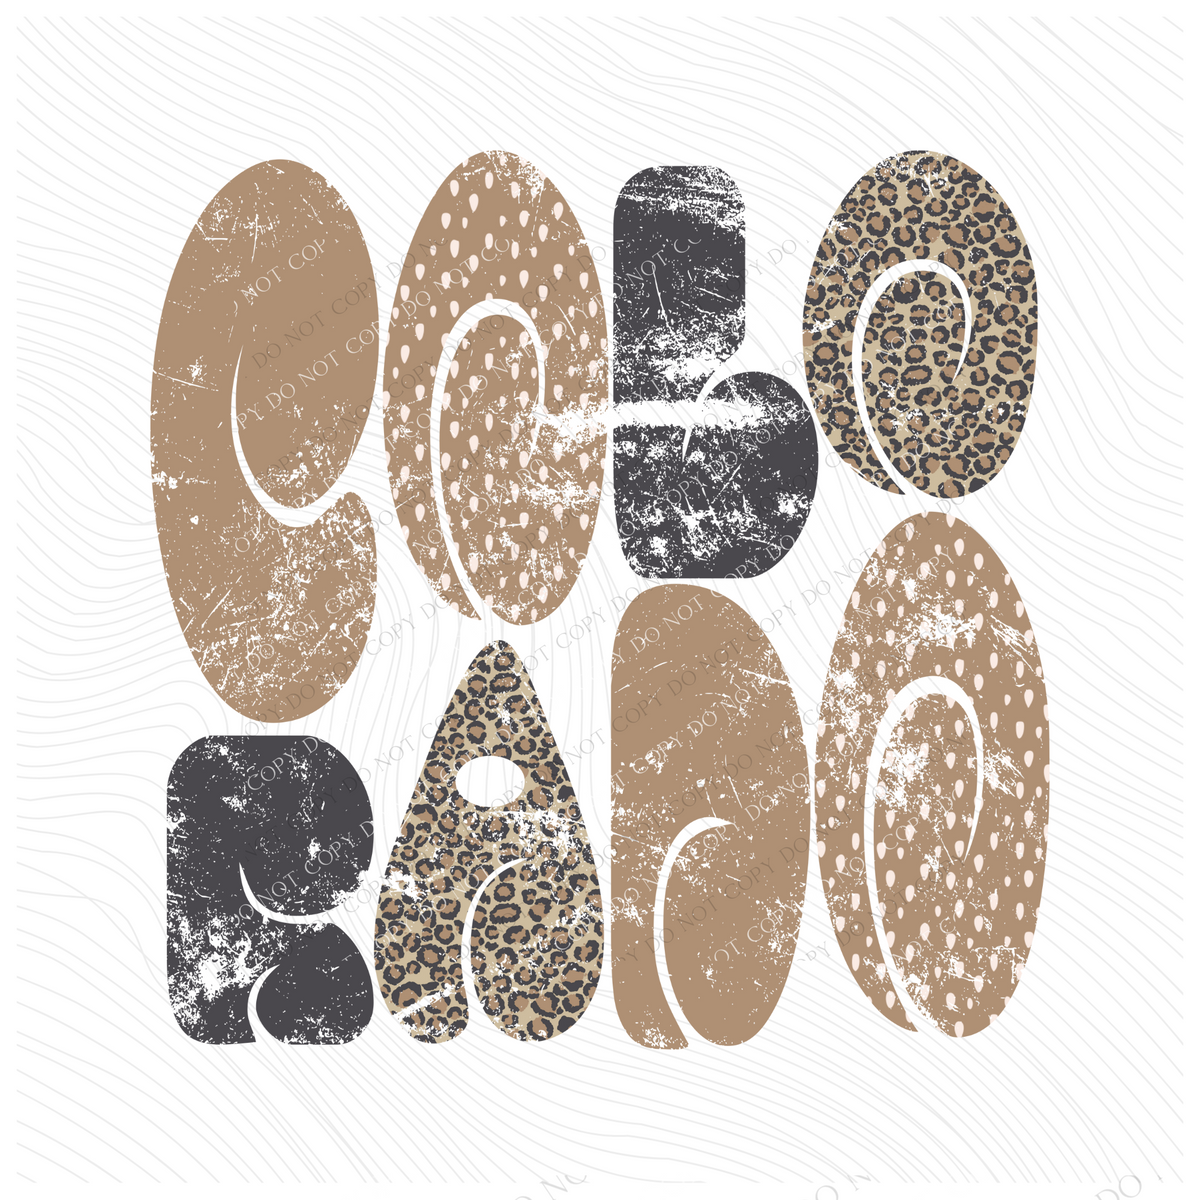 Colorado Chubby Retro Distressed Leopard print in tones of Tans & Faded Black Digital Design, PNG